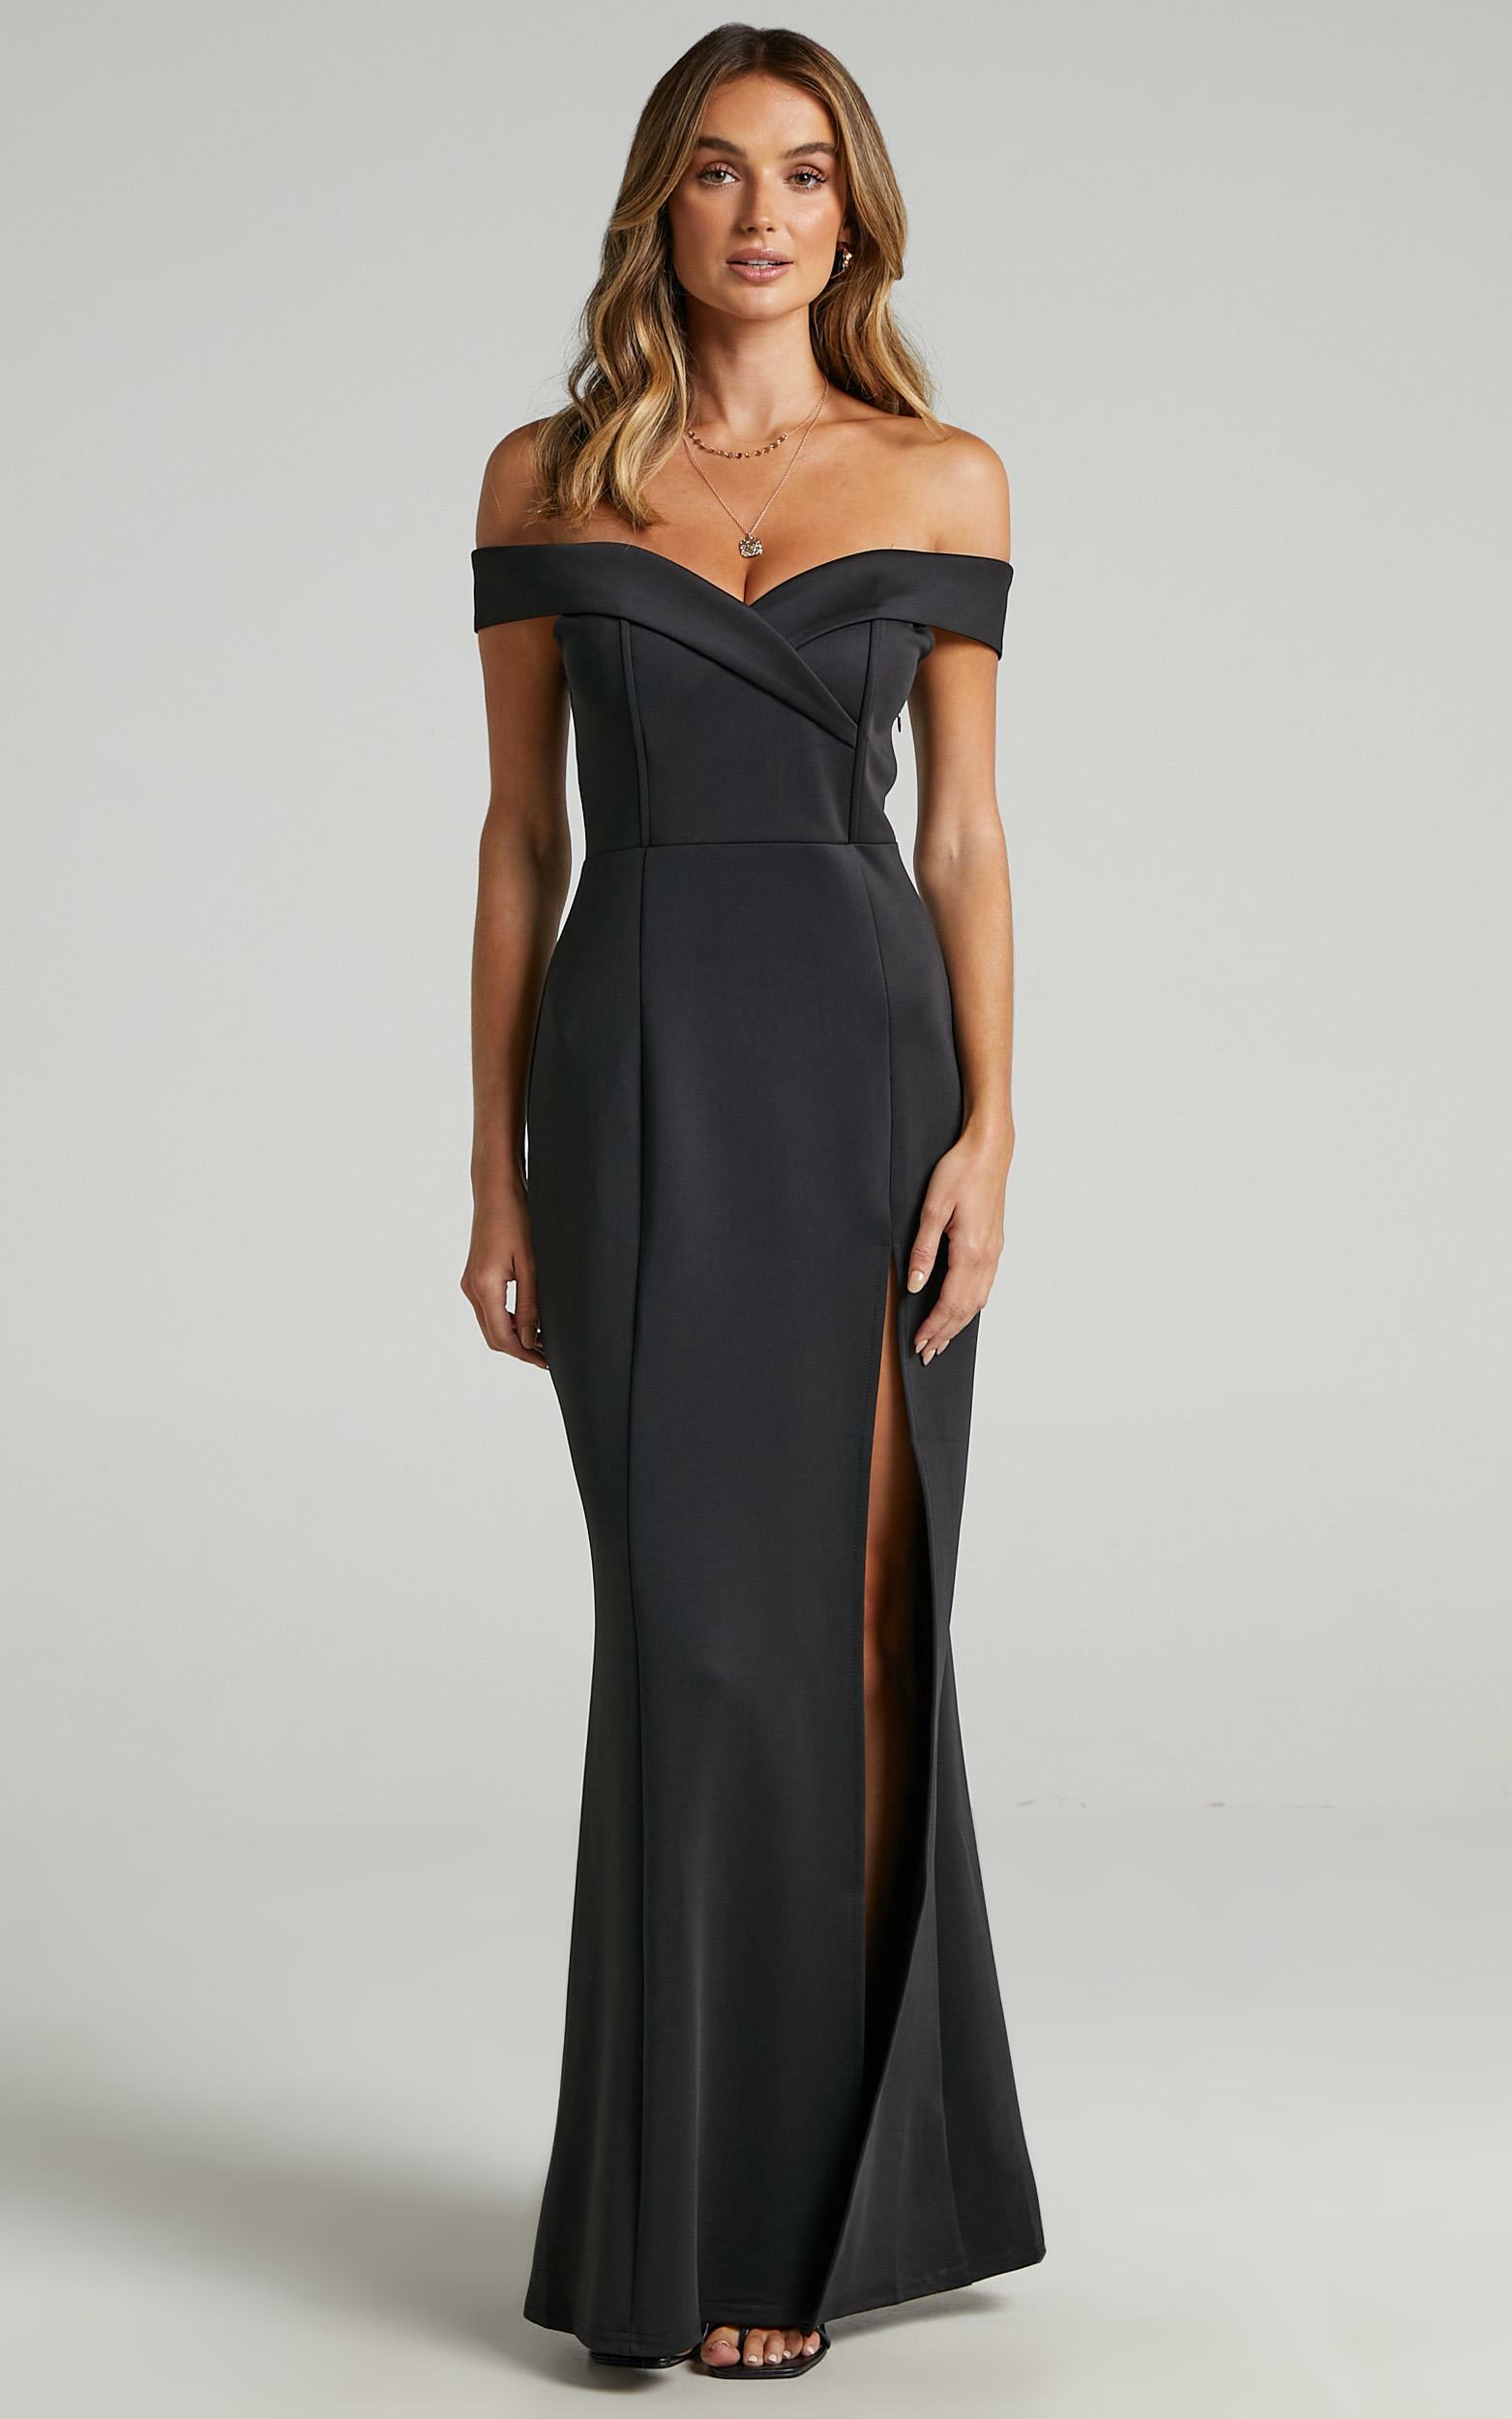 One For The Money Dress in Black - 18, BLK1, hi-res image number null